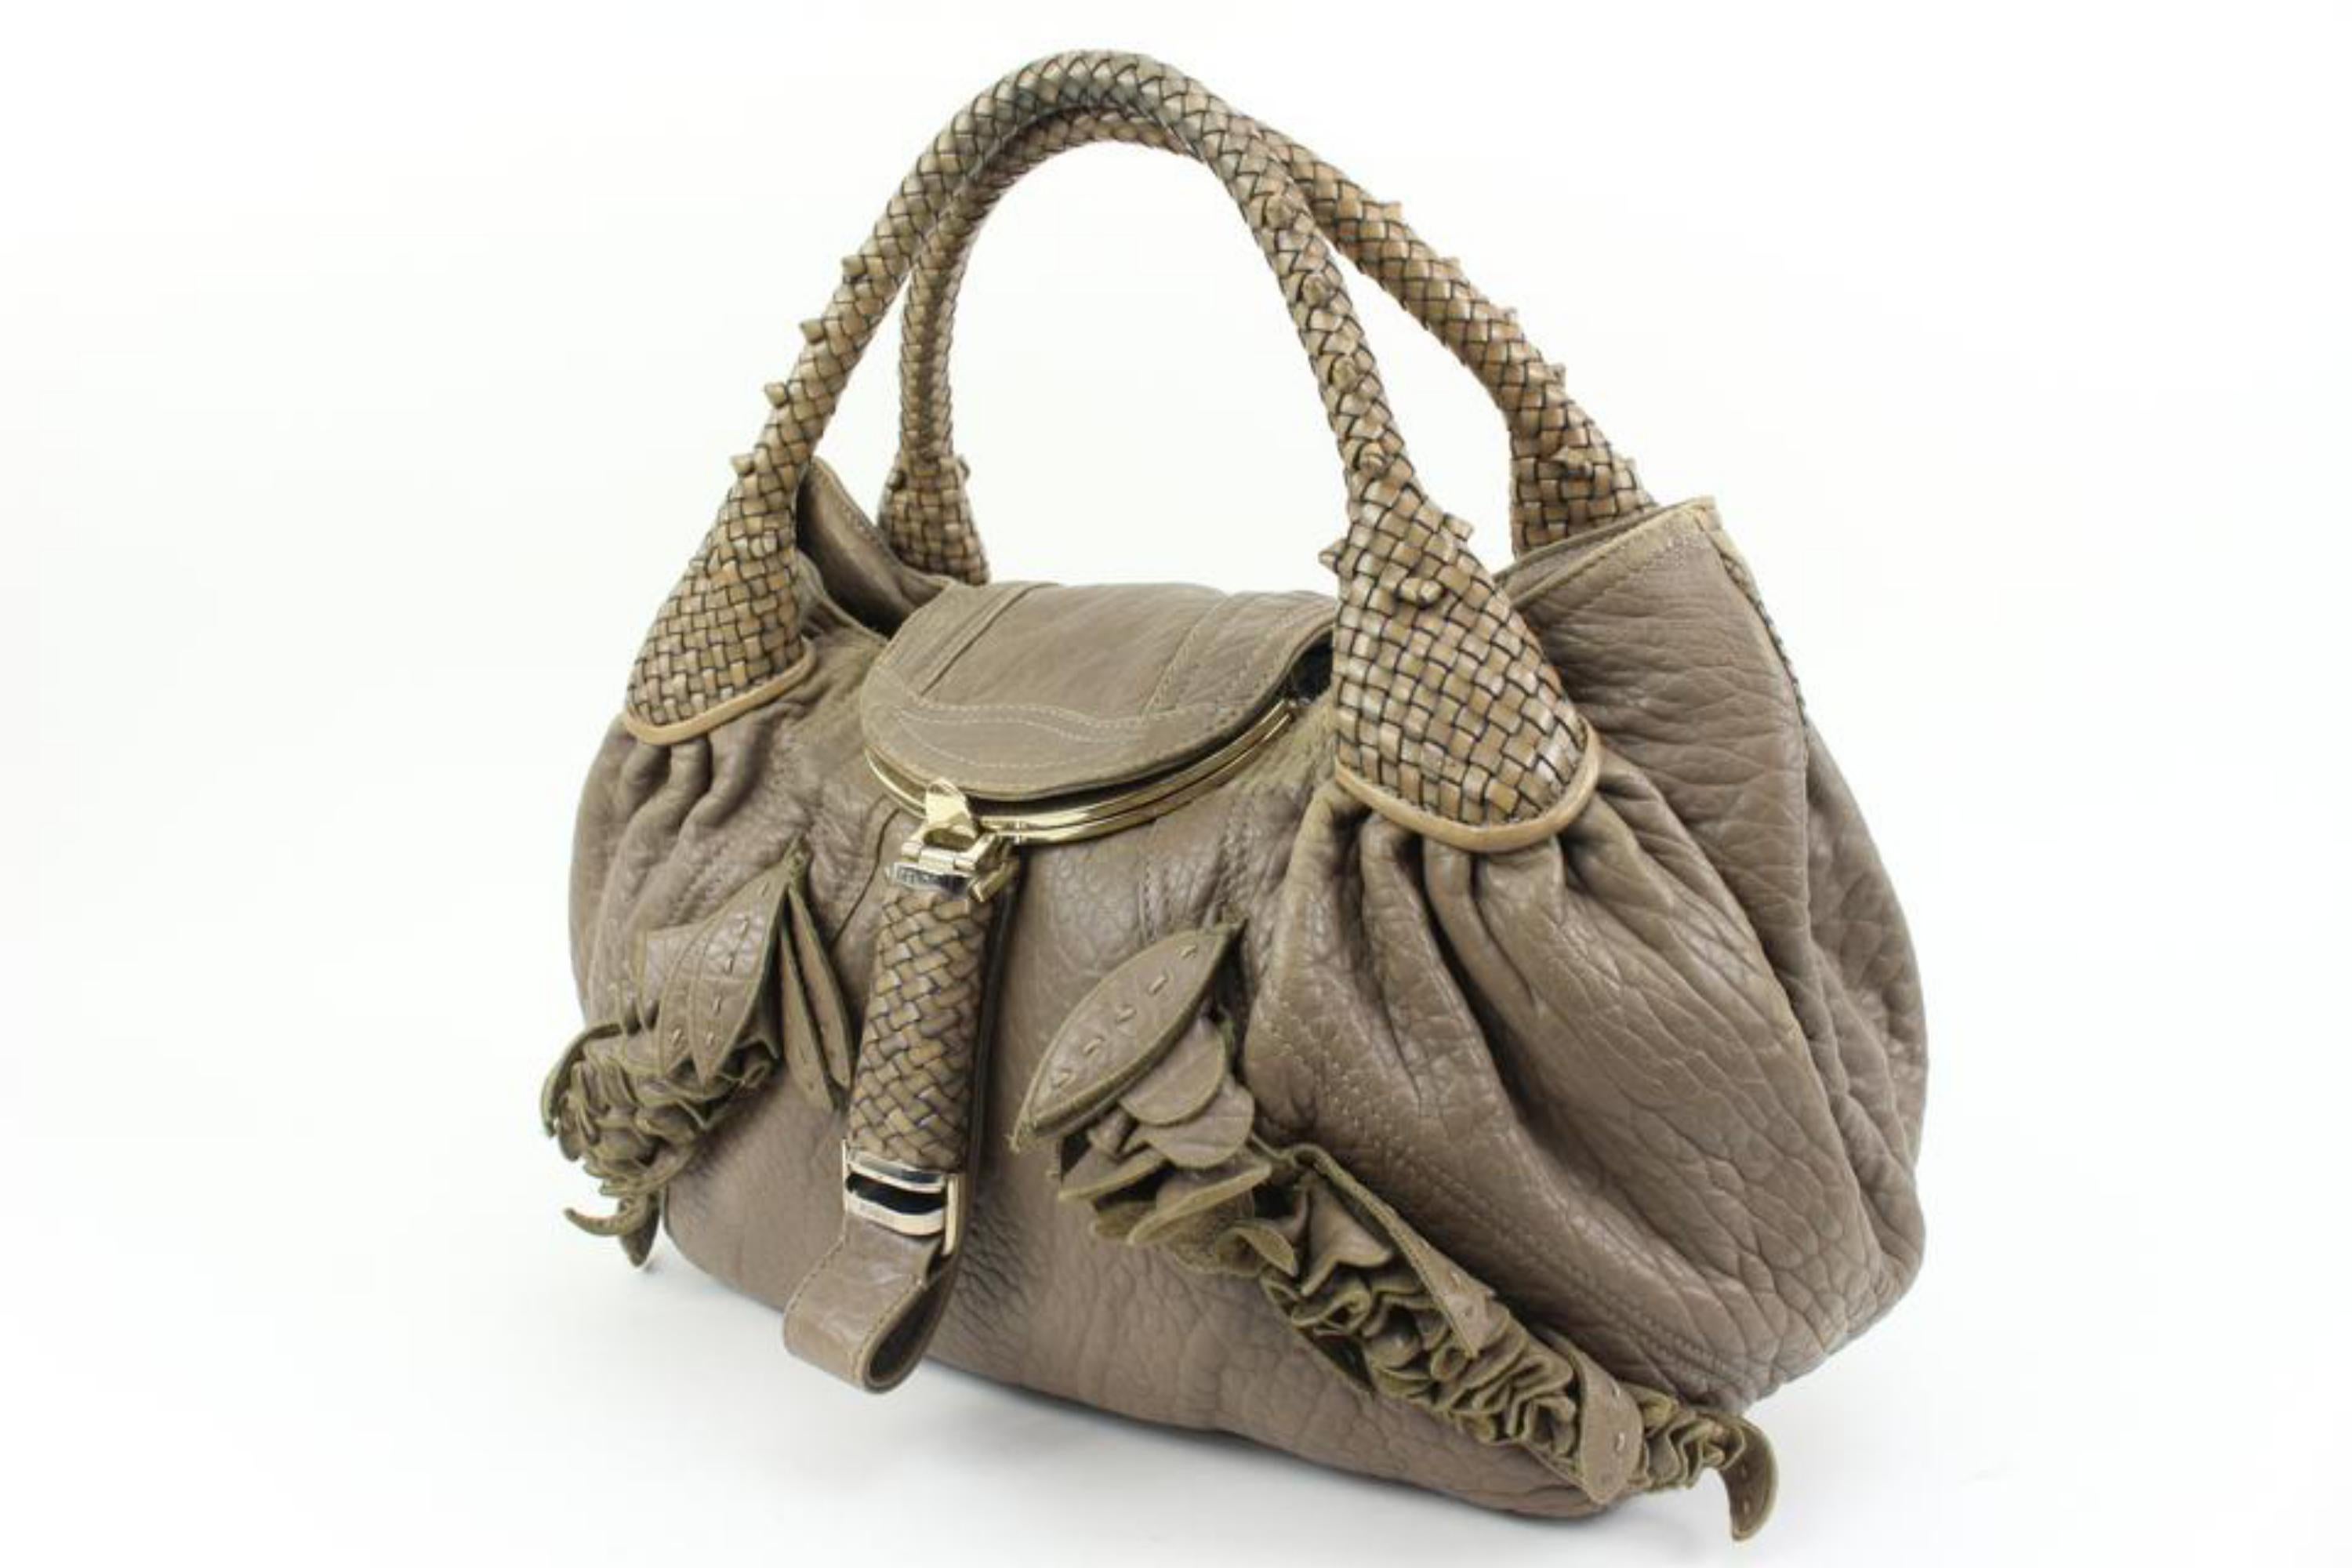 Fendi Taupe Nappa Wisteria Spy Hobo 6f323s
Date Code/Serial Number: 2373-8BR511-UN2-069
Made In: Italy
Measurements: Length:  17